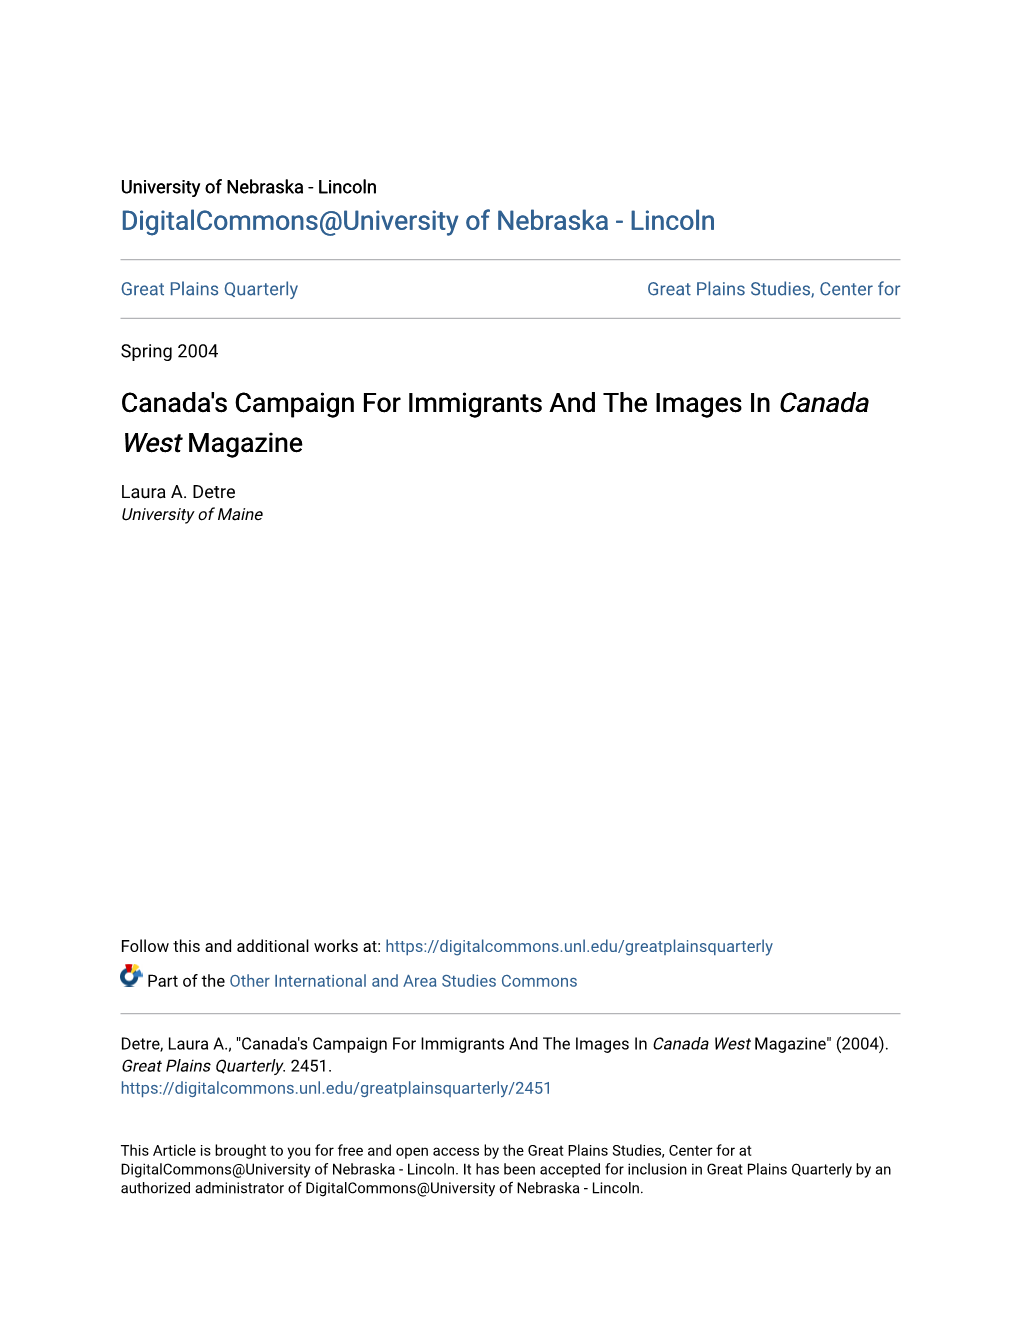 Canada's Campaign for Immigrants and the Images in &lt;I&gt;Canada West&lt;/I&gt;